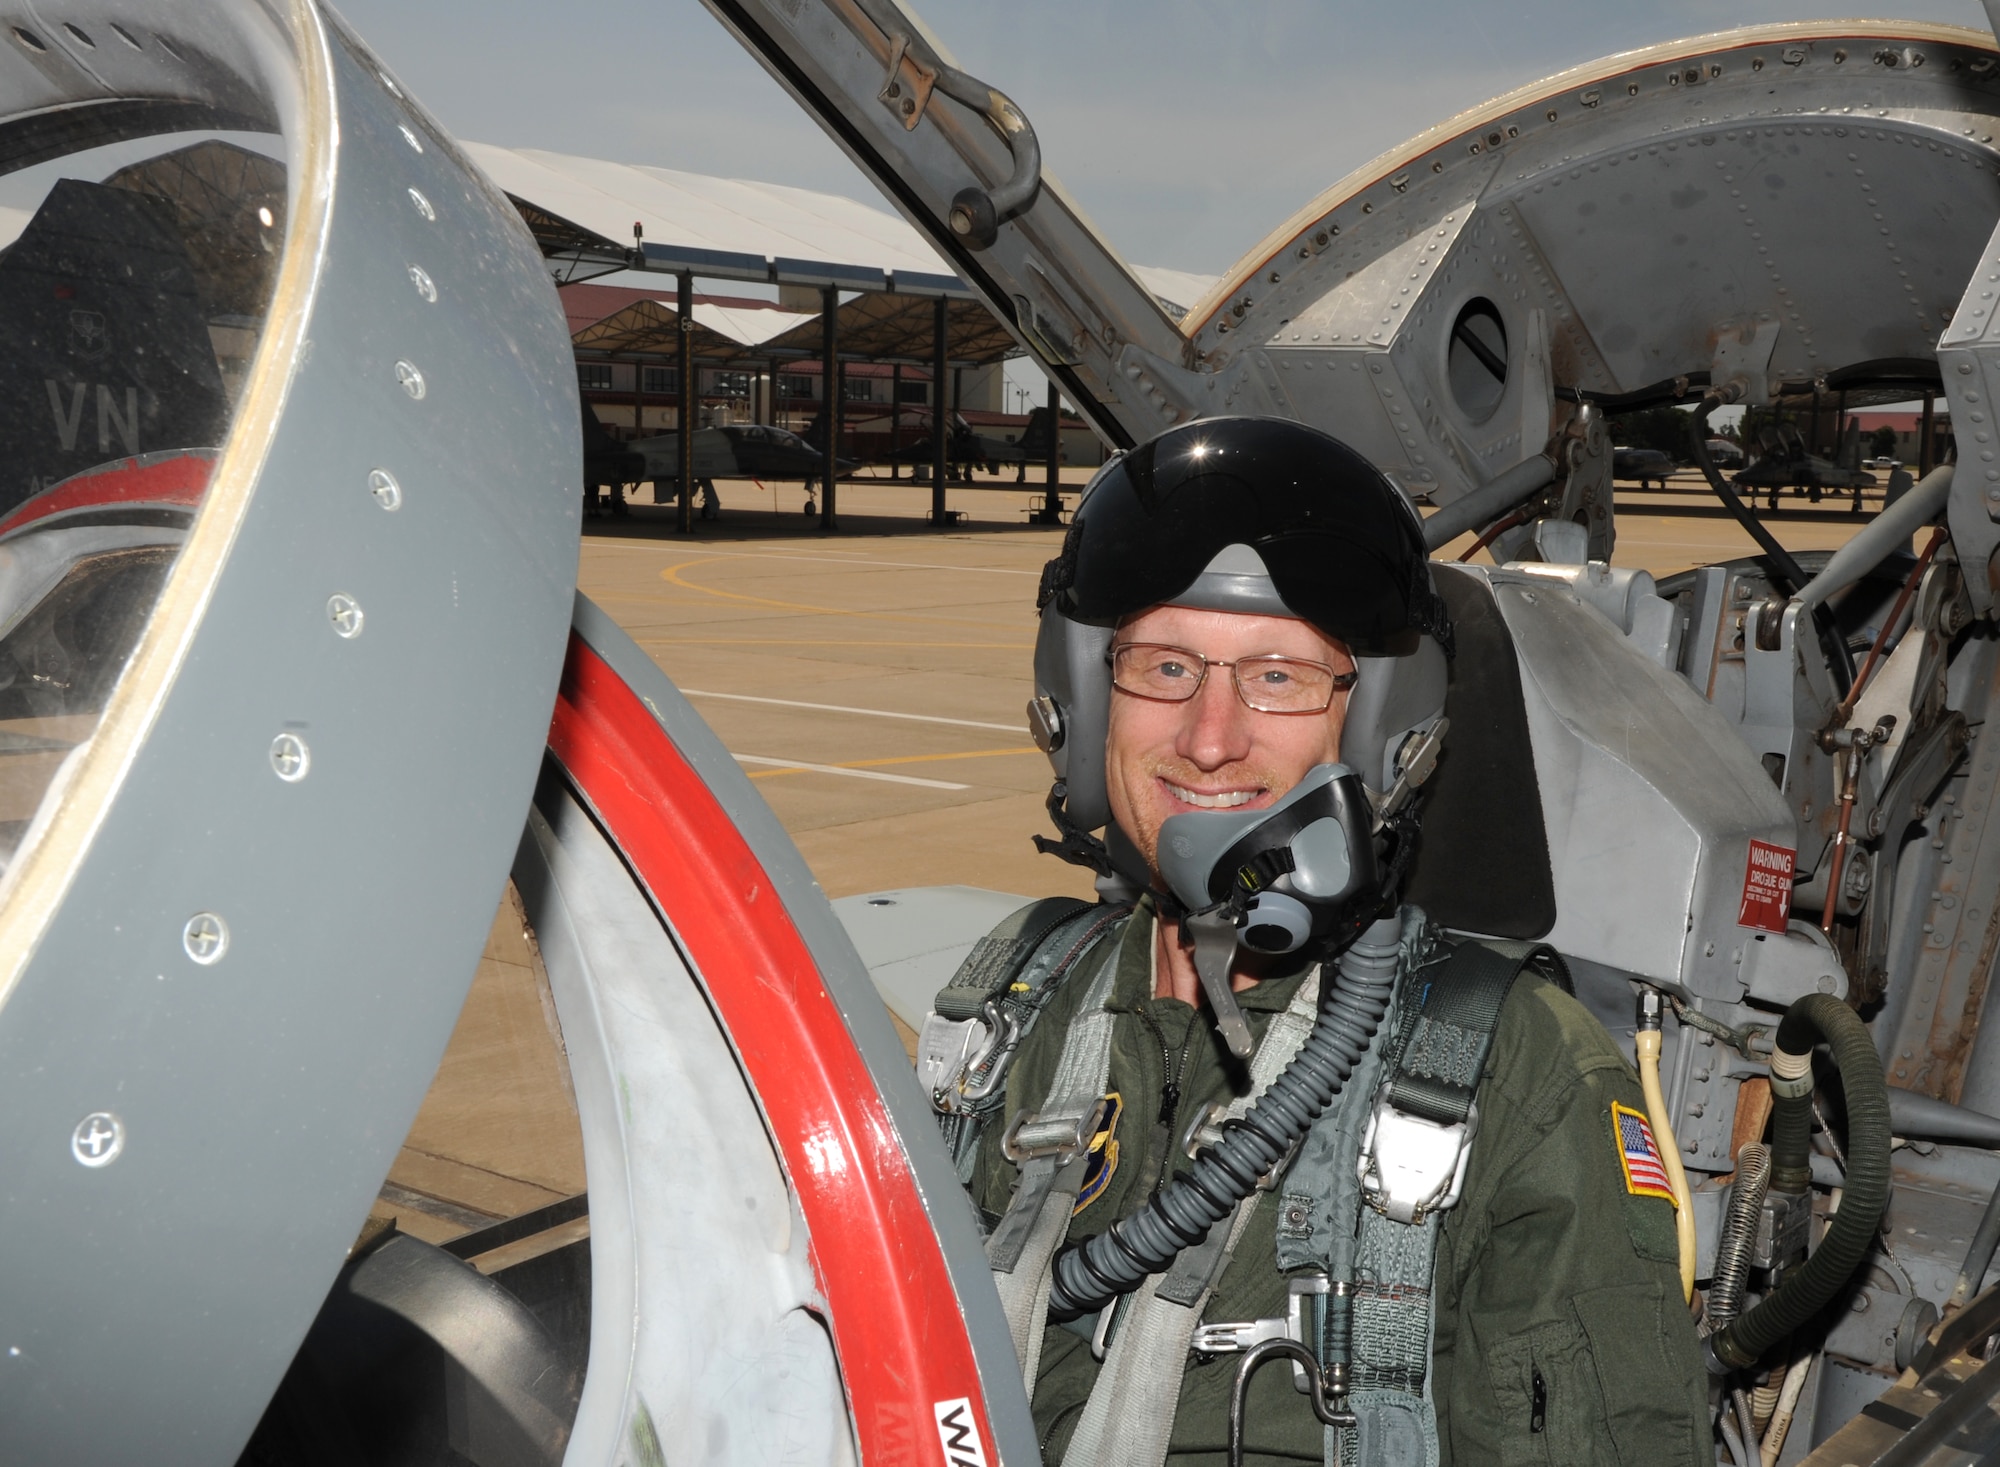 Local radio station personality takes orientation flight in T-38 ...